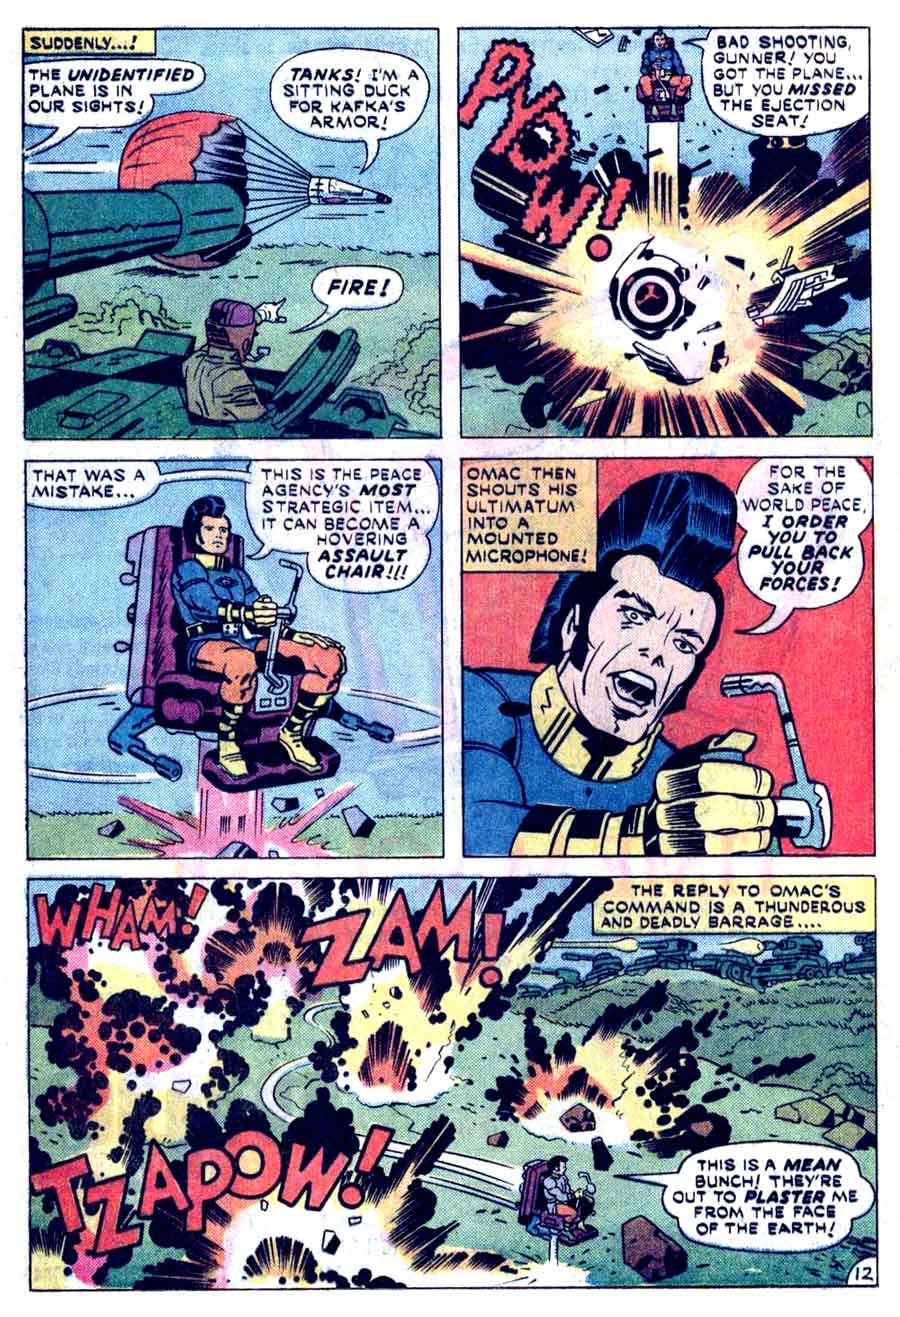 Omac v1 #3 dc bronze age comic book page art by Jack Kirby